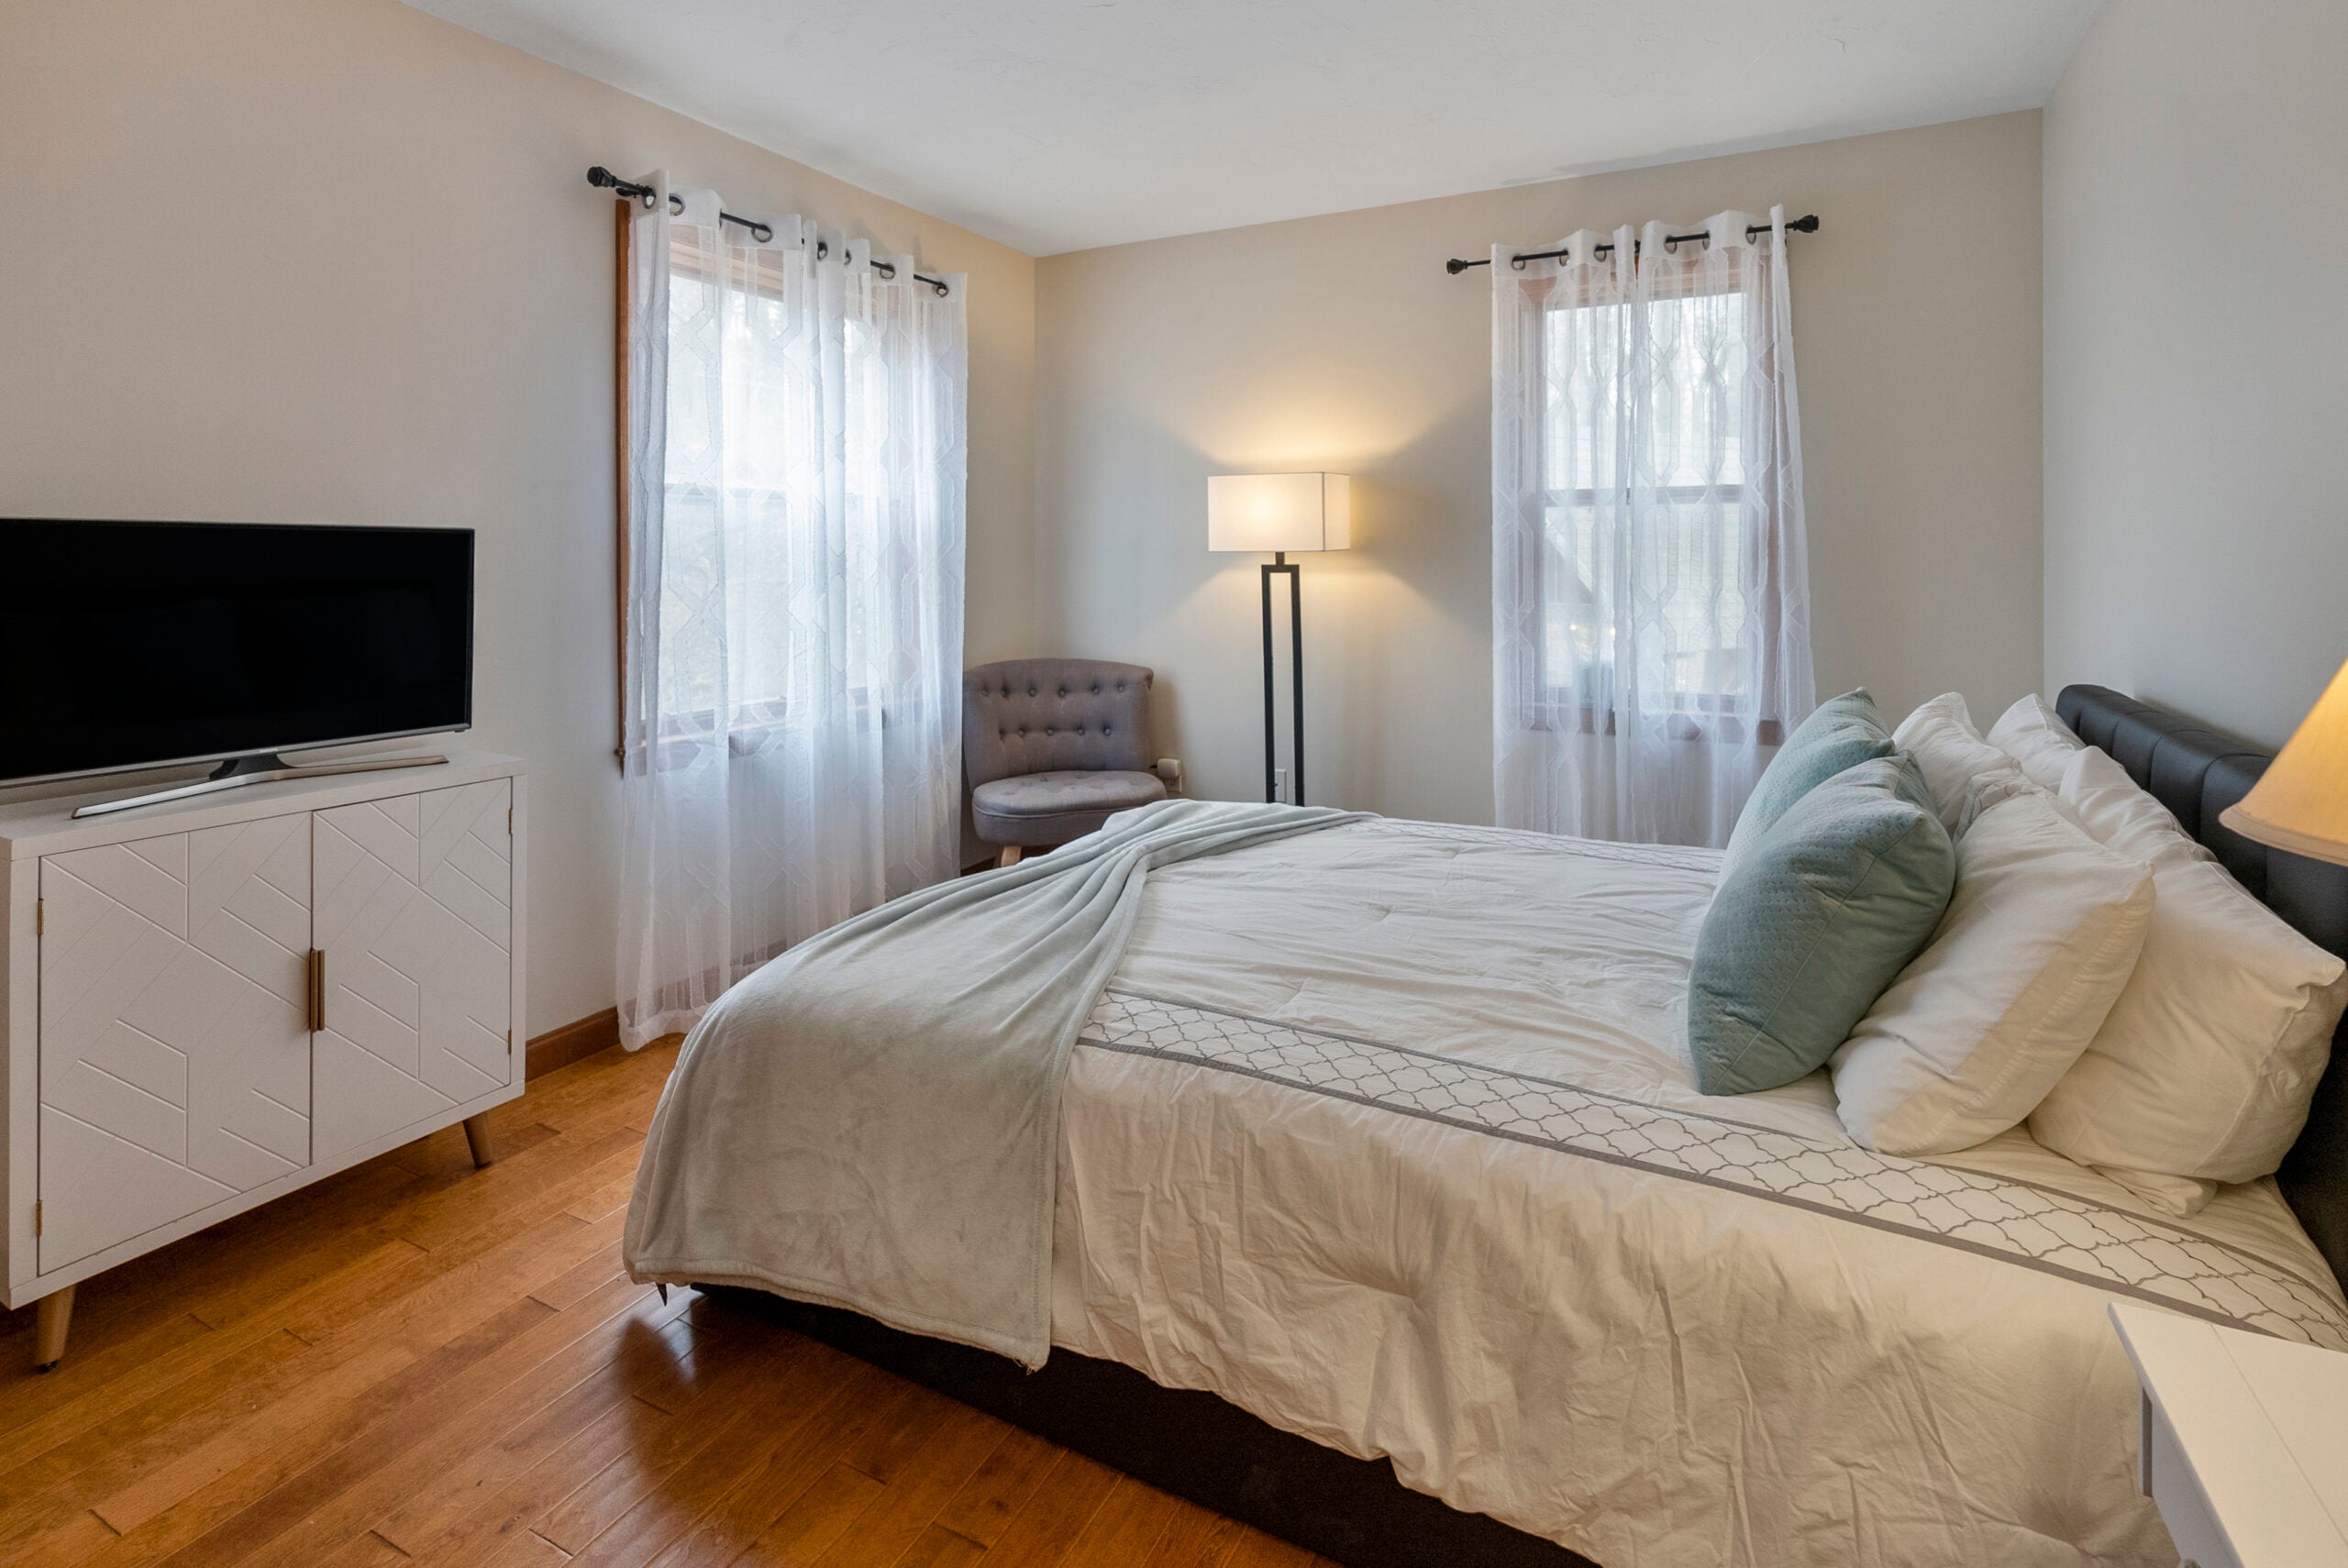 The guest bedroom in our home of the week.